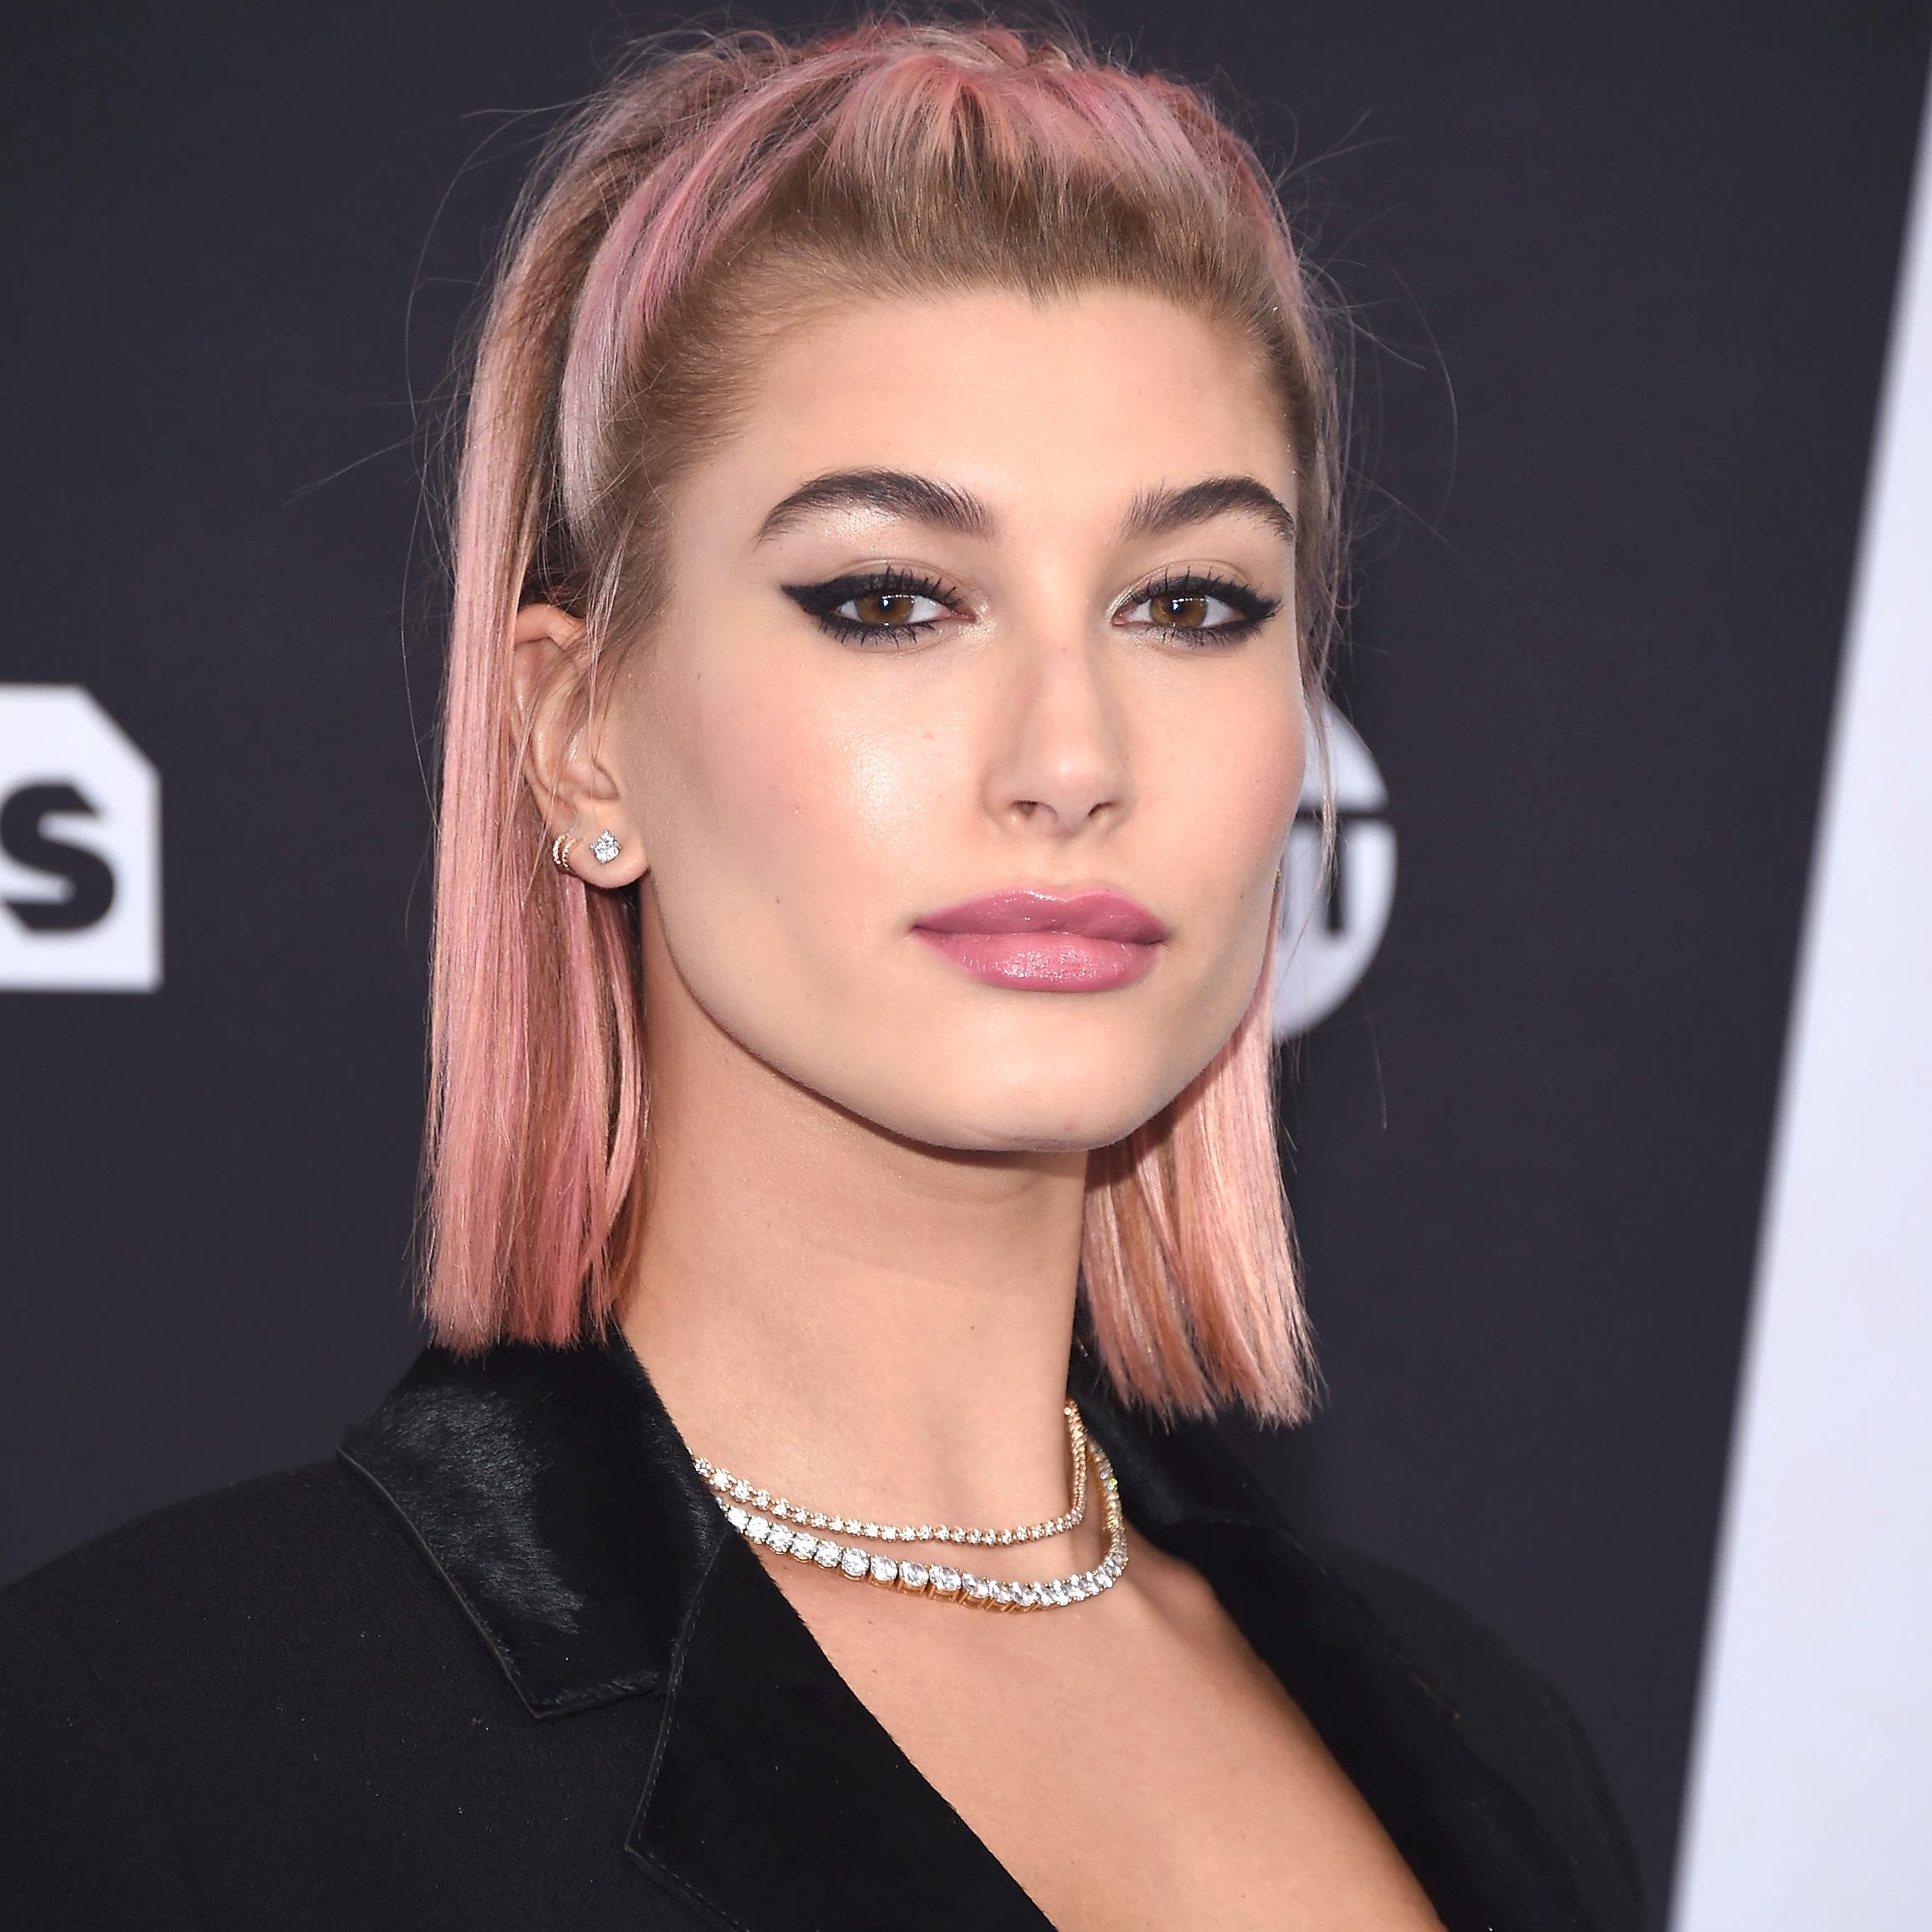 Trend: Pink pucker. Hailey Baldwin attended the 2018 Turner Upfront on May 16, 2018 in New York with a pink-hued pout.